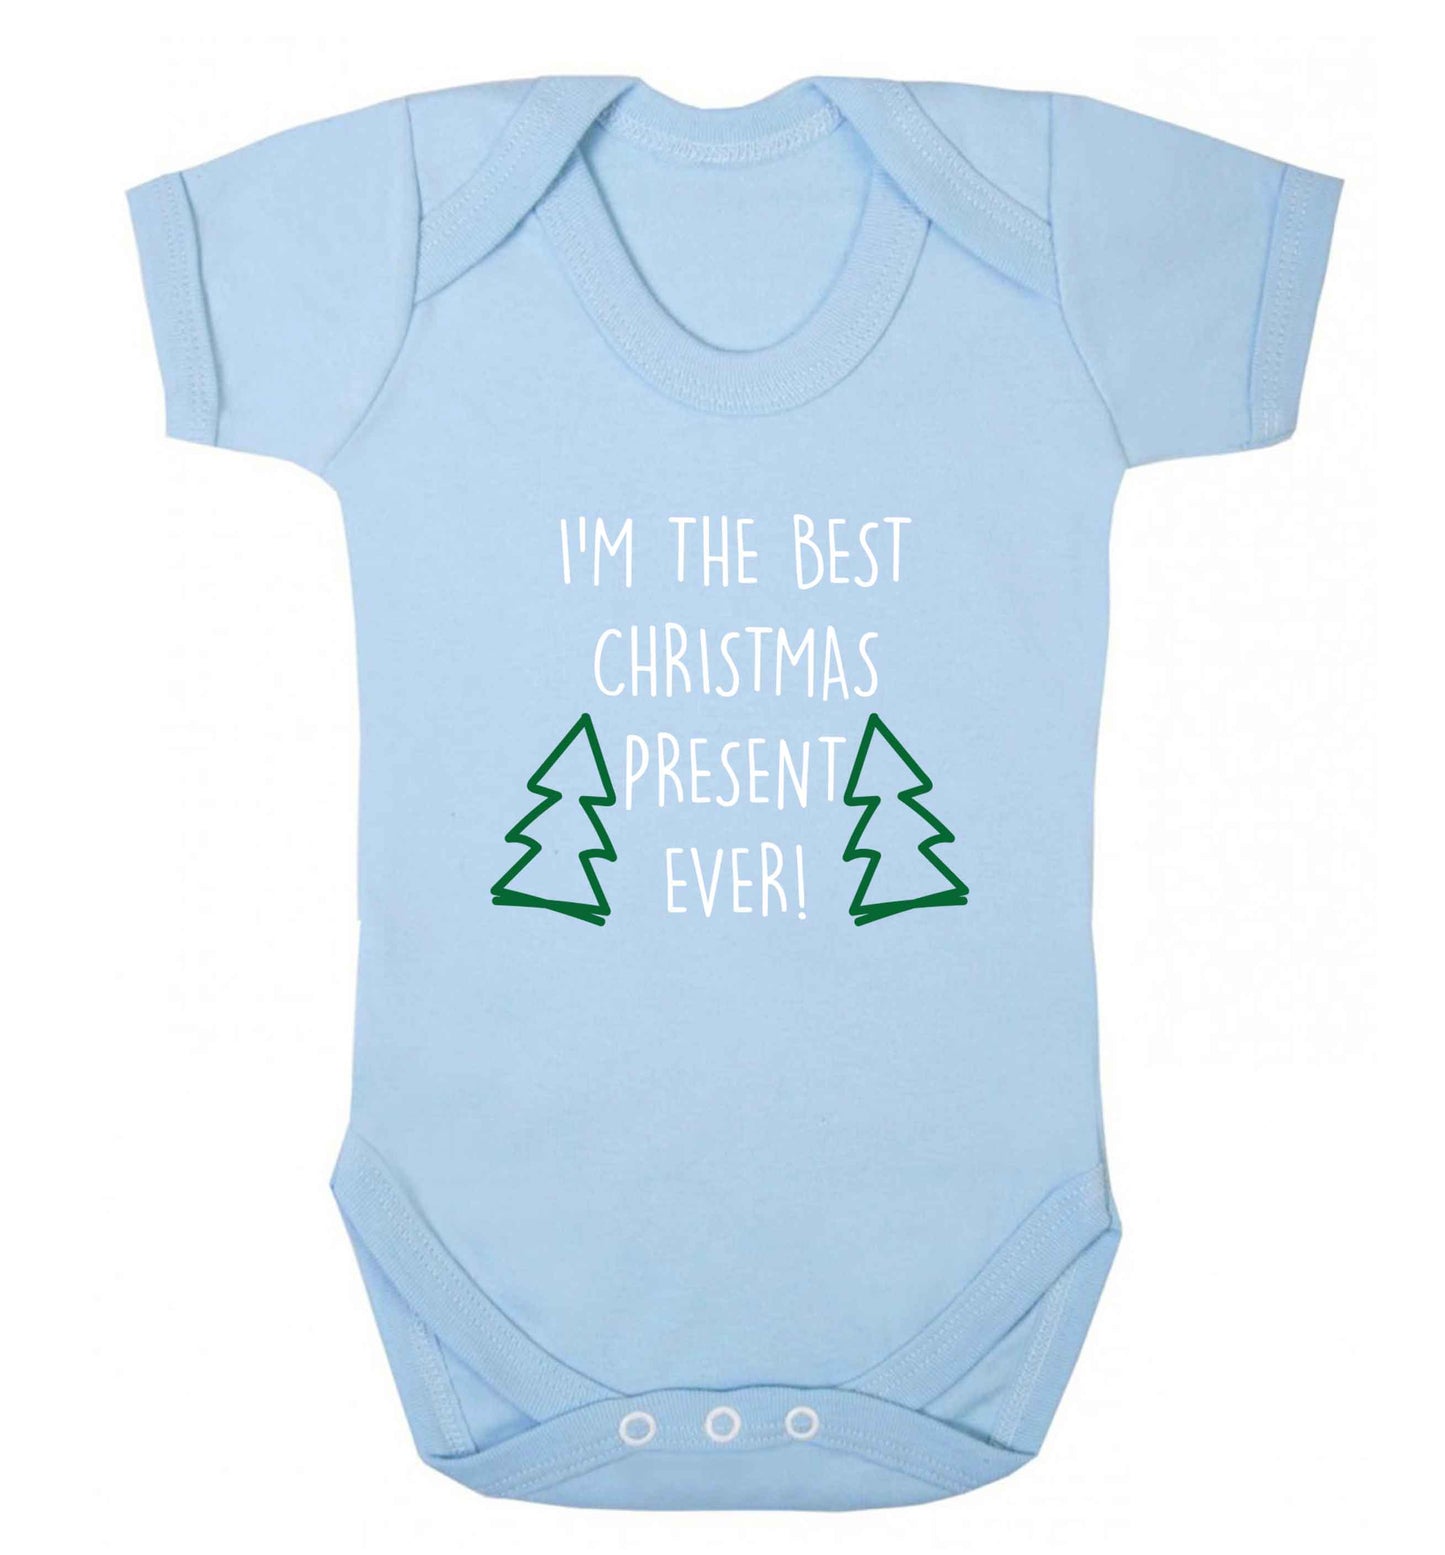 I'm the best Christmas present ever baby vest pale blue 18-24 months